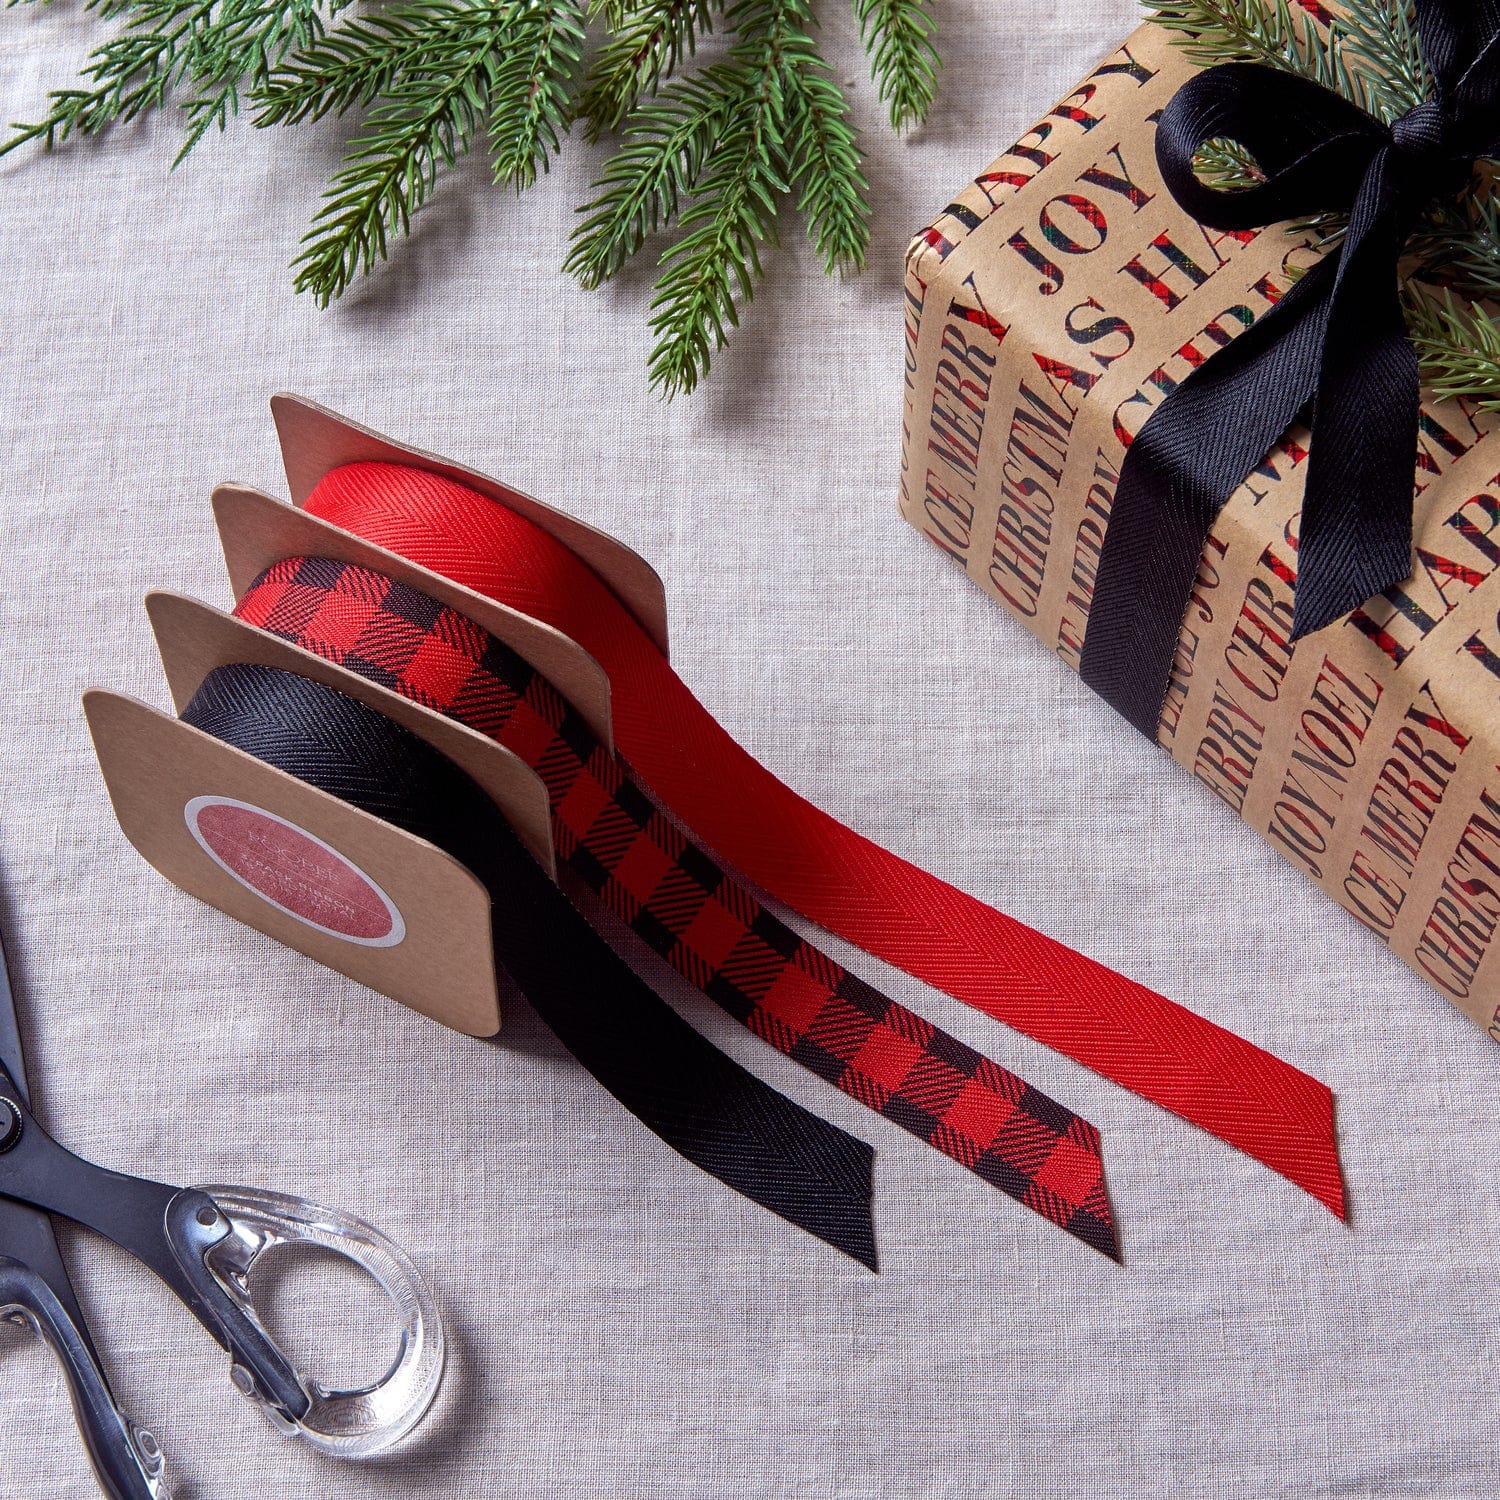 Christmas Red Ribbon Accessories Svg Graphic by Na Punya Studio · Creative  Fabrica